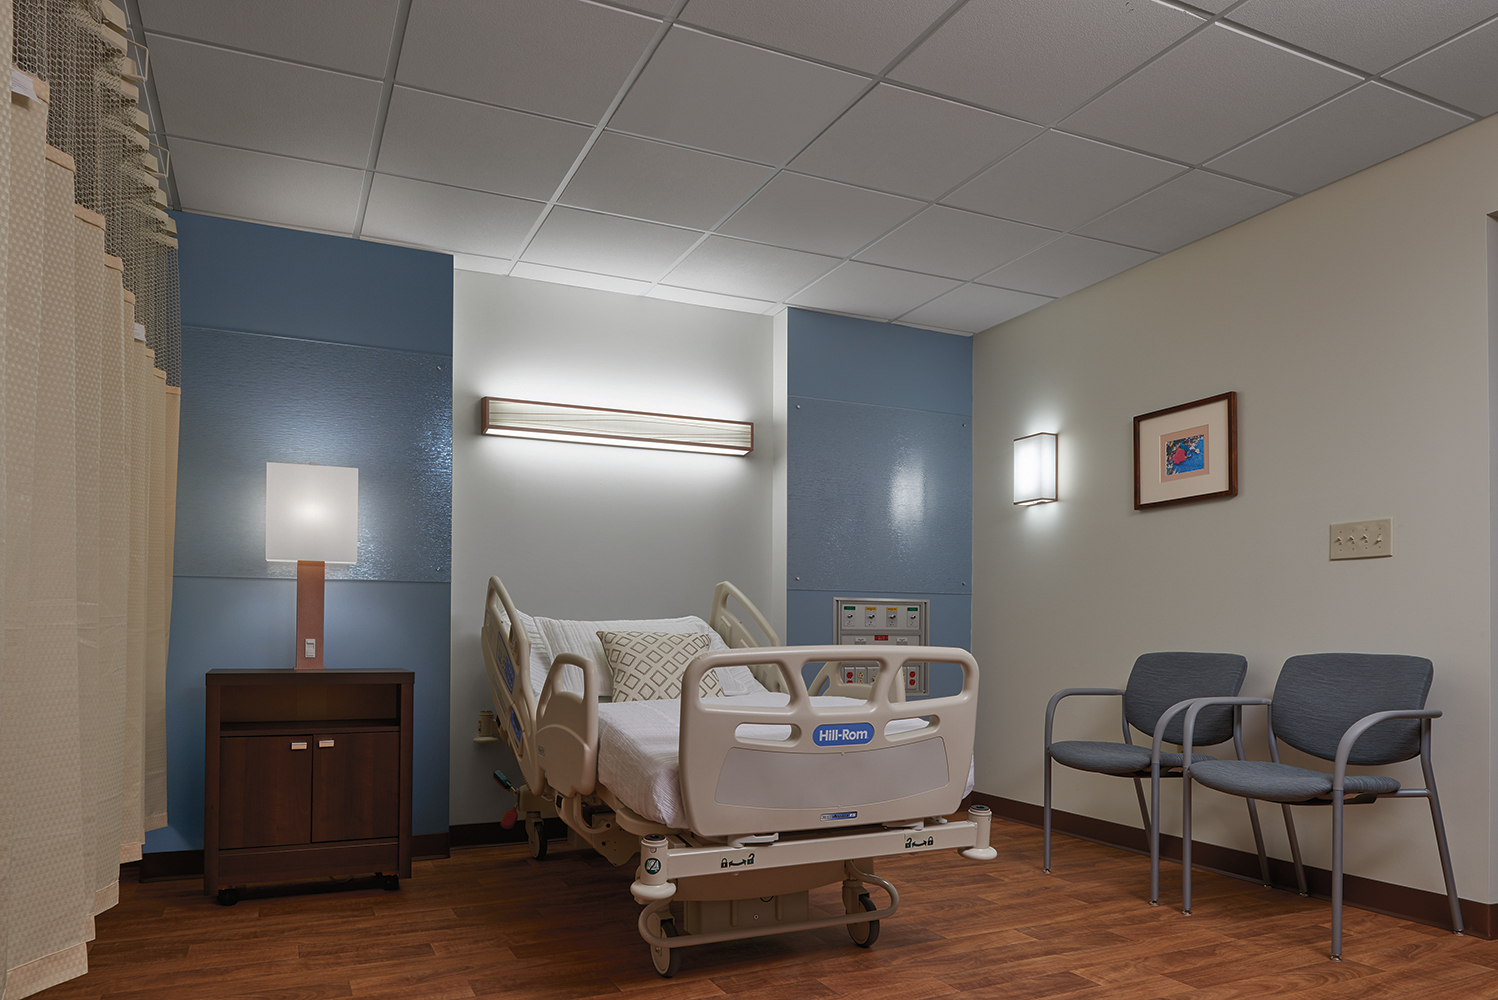 Serenity patient room lighting fixtures illuminate a hospital bed from a table lamp, headwall luminaire, and wall sconce.